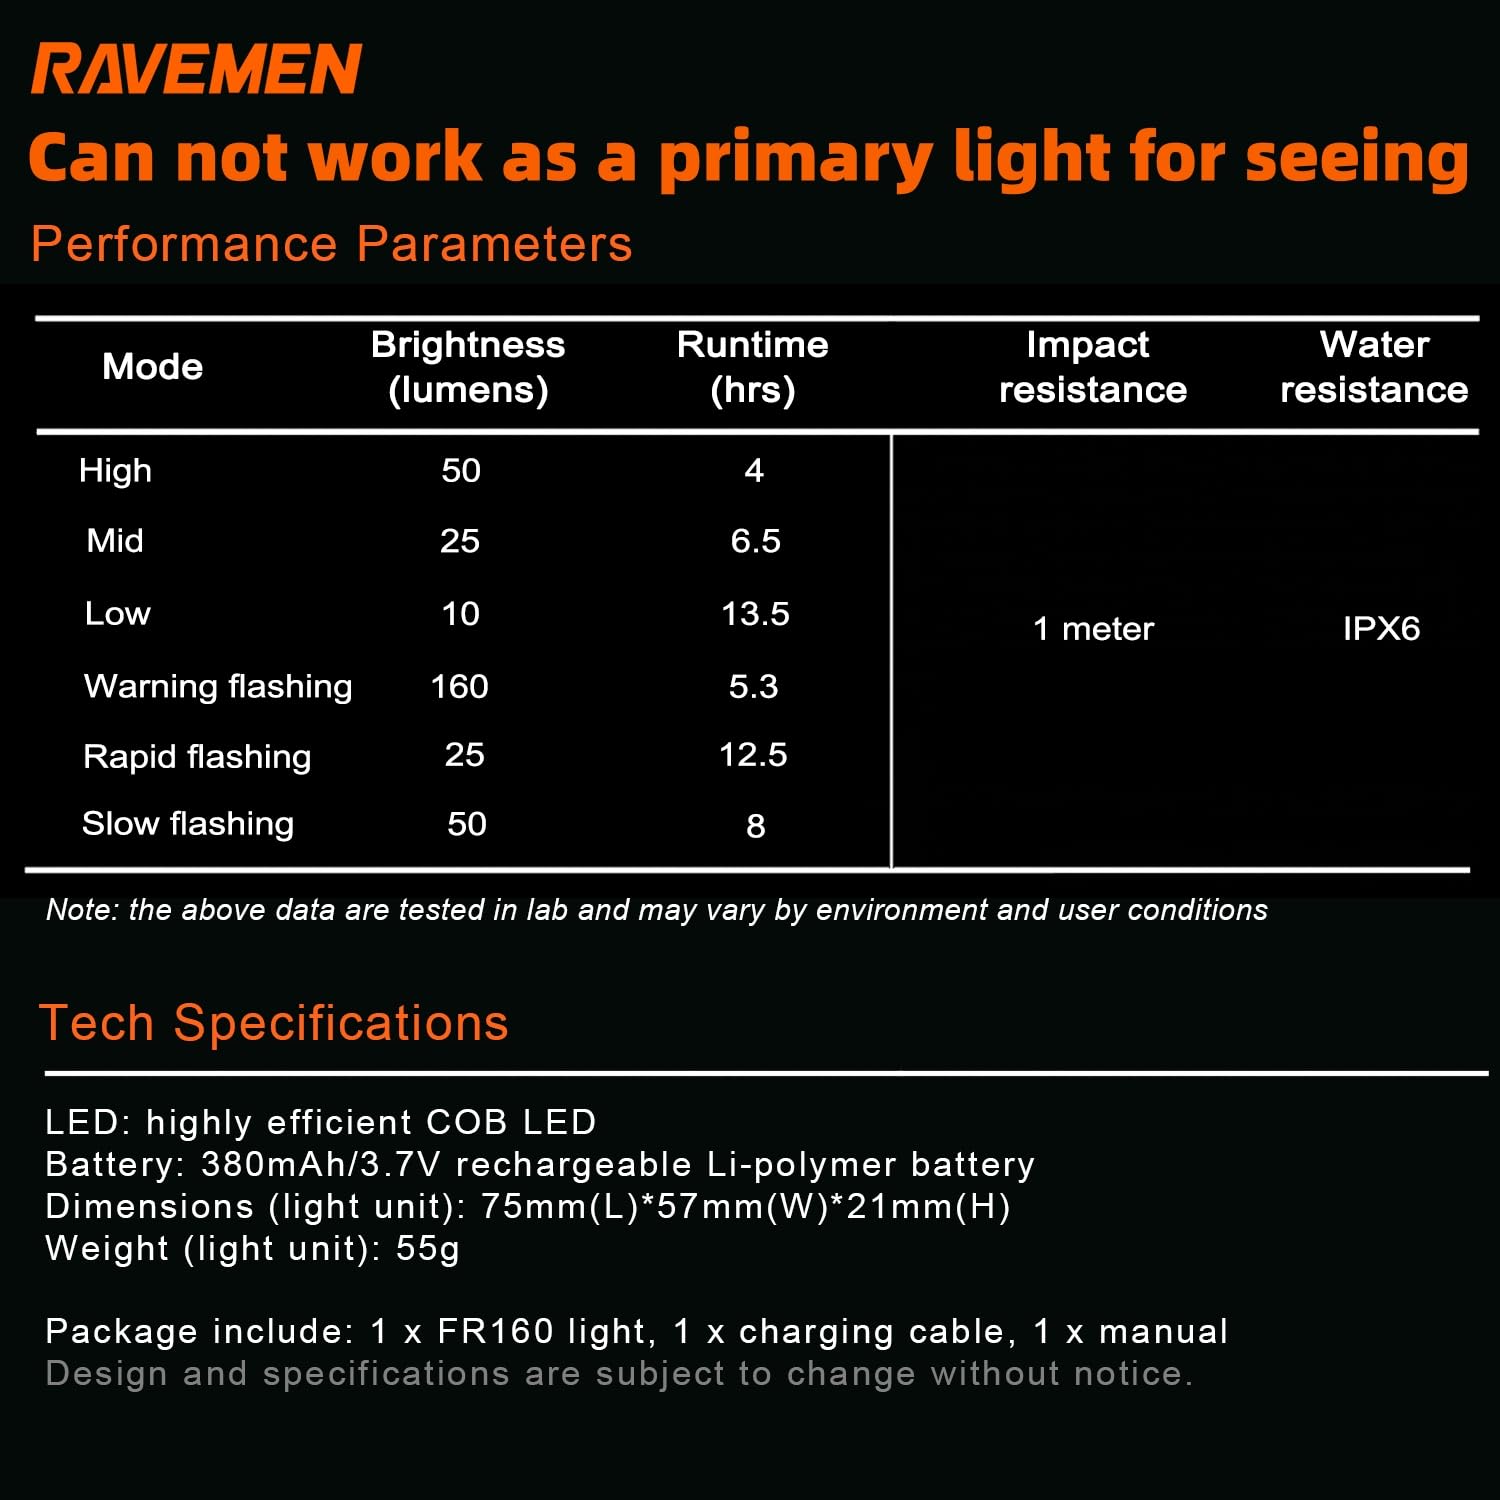 RAVEMEN FR160 Compatible with Garmin/iGPSPORT/COOSPO Cycling GPS/Bike Computer, IPX6 Waterproof Auxiliary Light with Side Visibility Warning Flash Light for Riding Safety (Patent Protected)